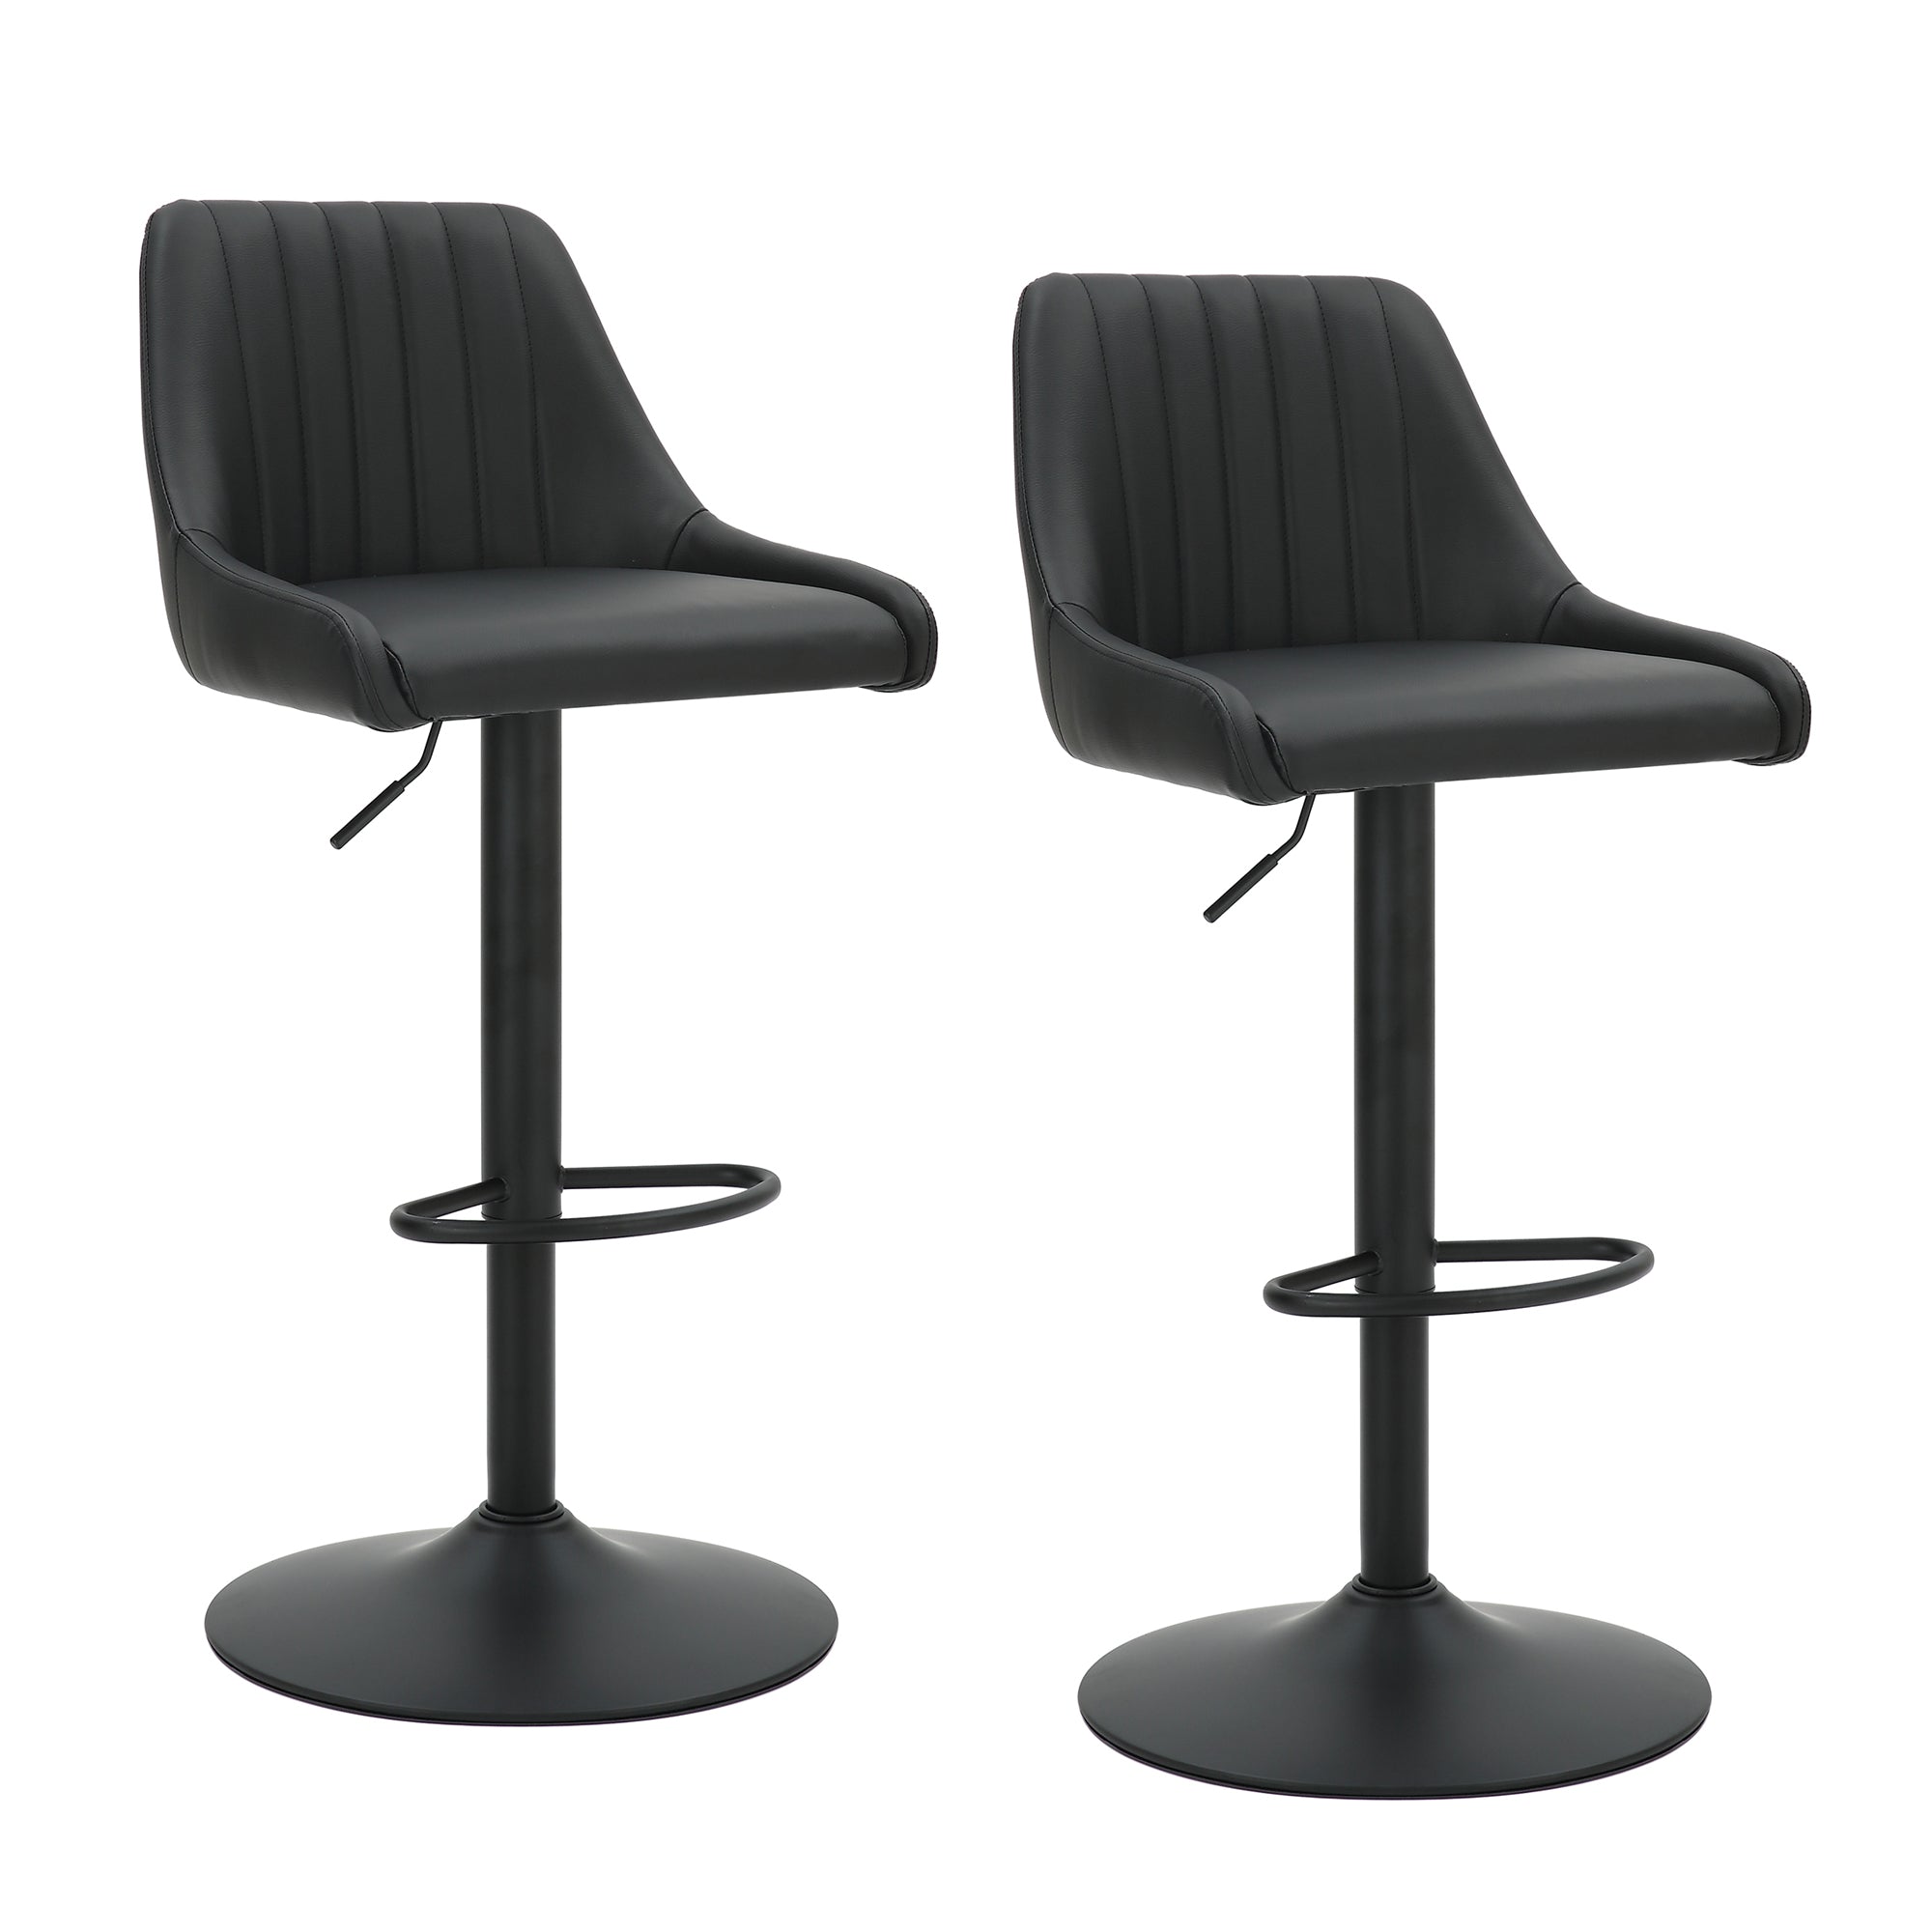 Kron Adjustable Height Air-Lift Swivel Stool, Set of 2, in Black Faux Leather 203-574PUBK